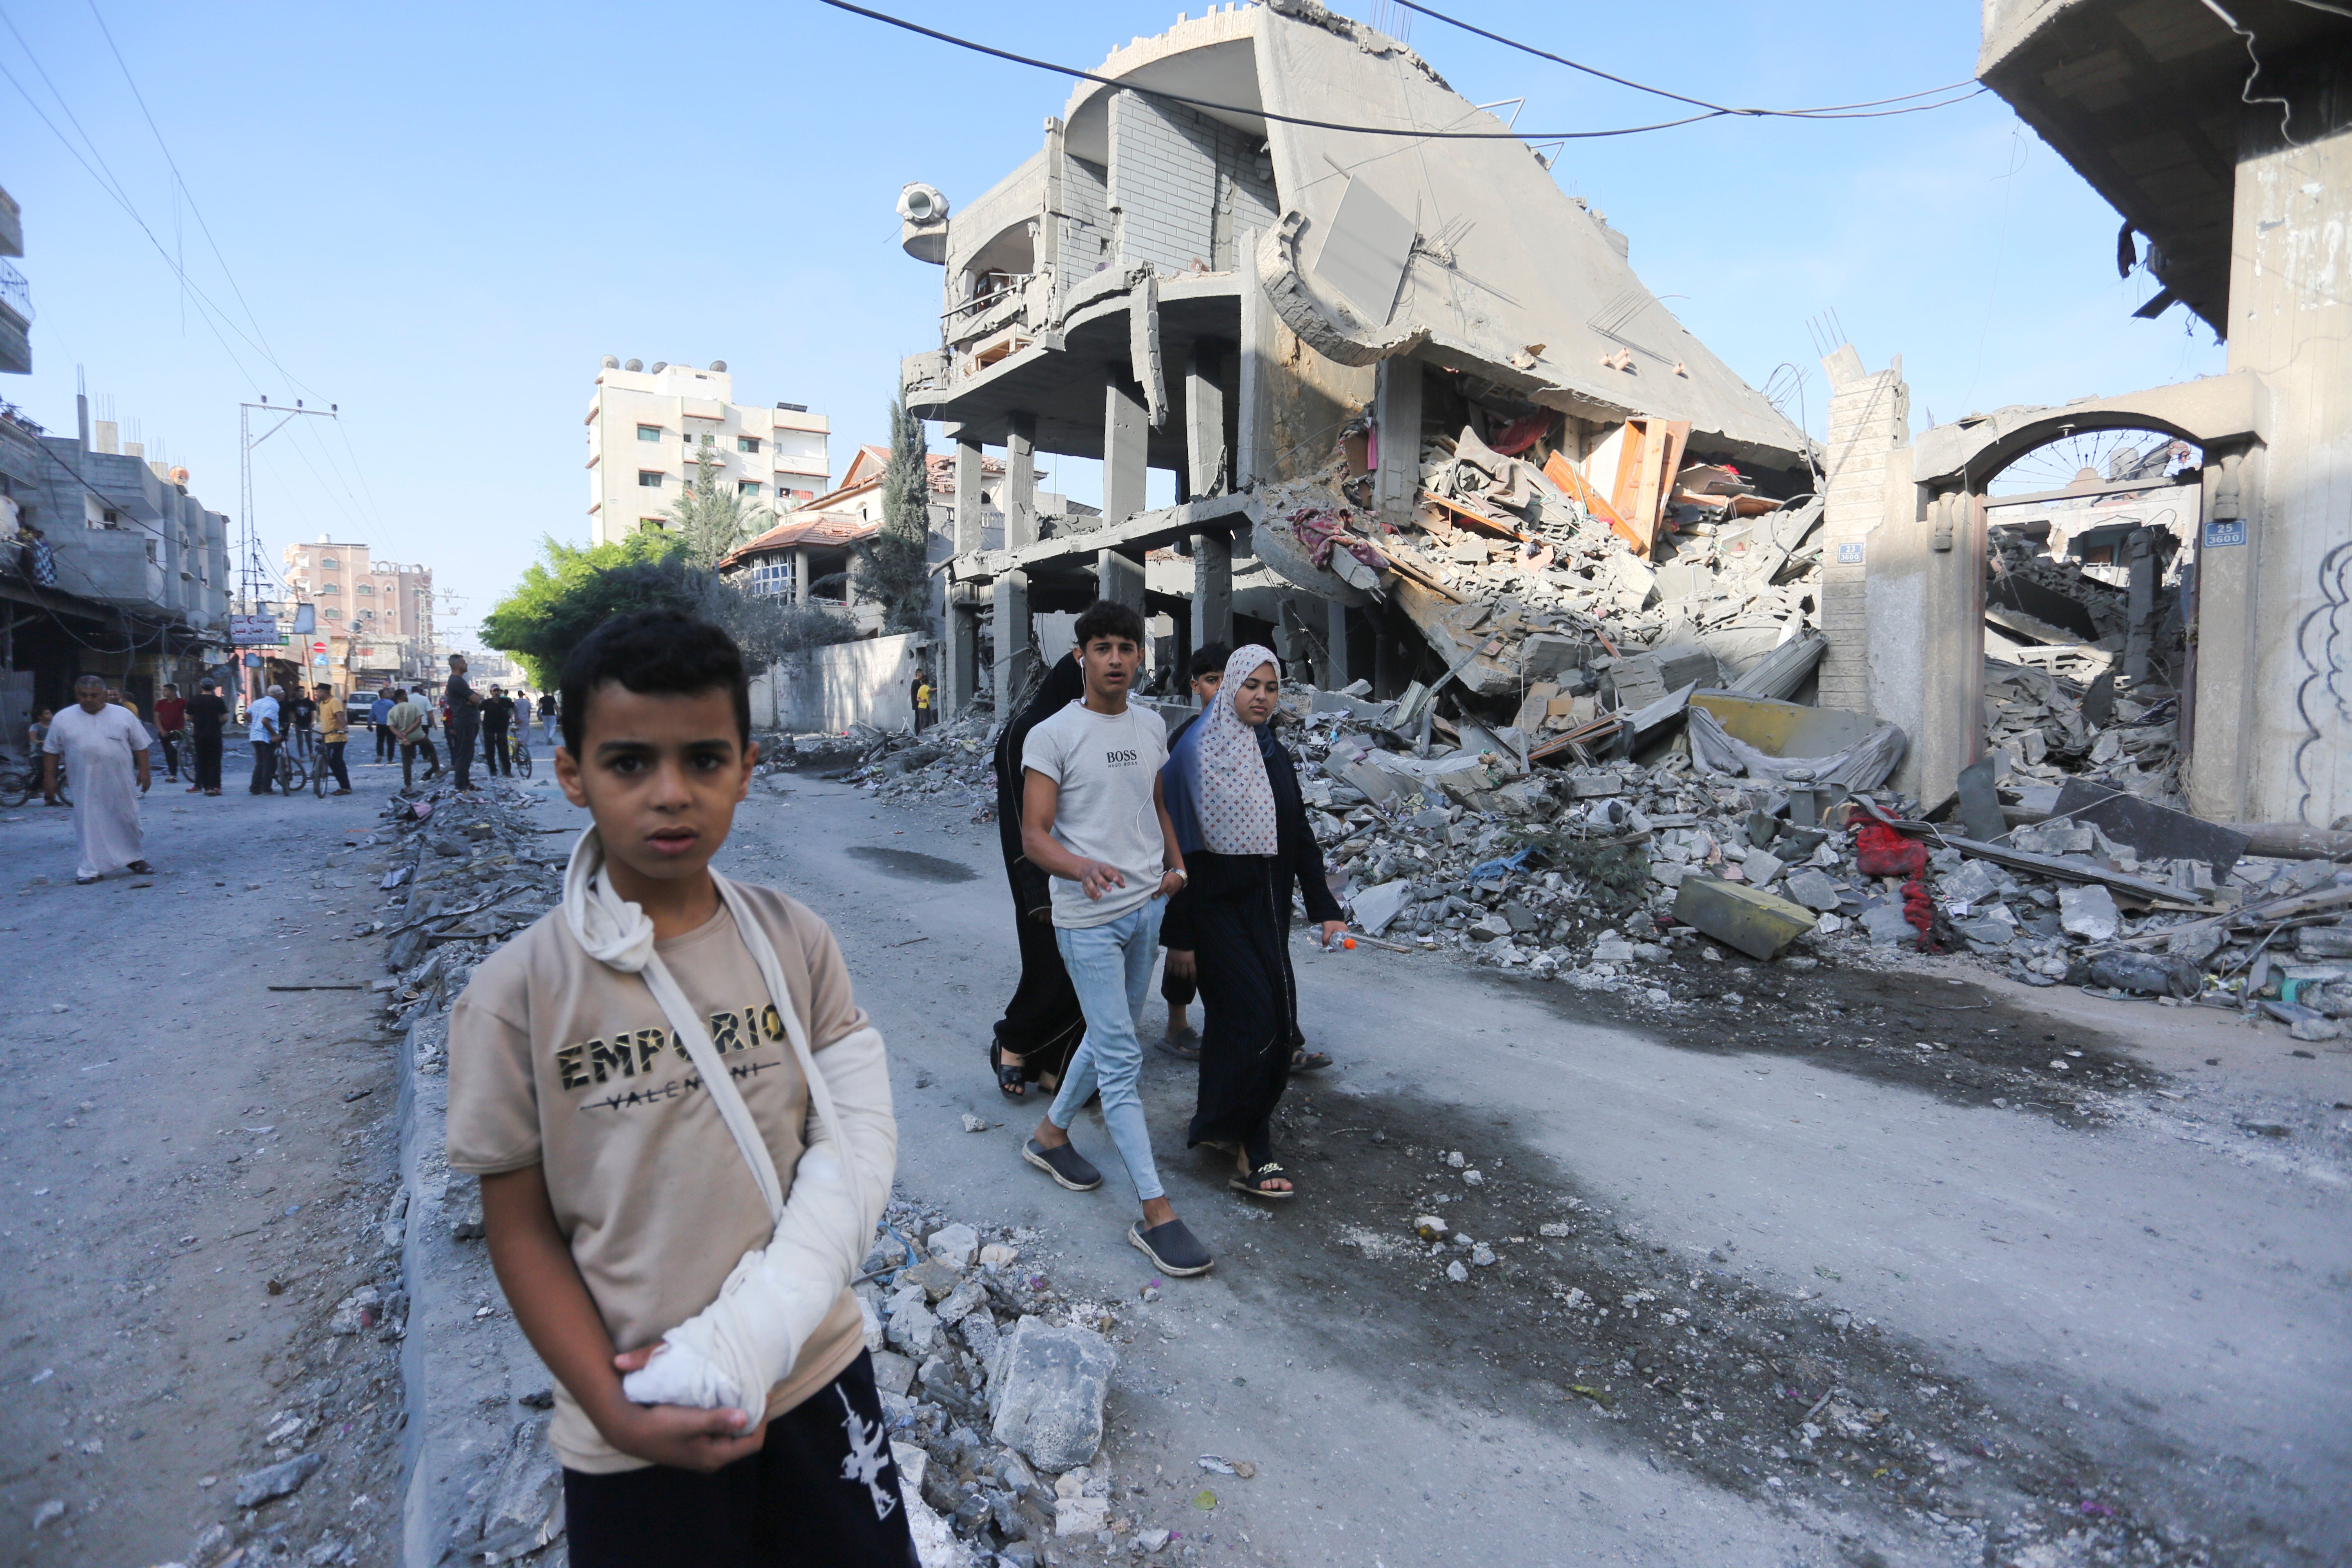 Palestinians walk by buildings destroyed in the Israeli bombardment of the Gaza Strip in Rafah on Tuesday